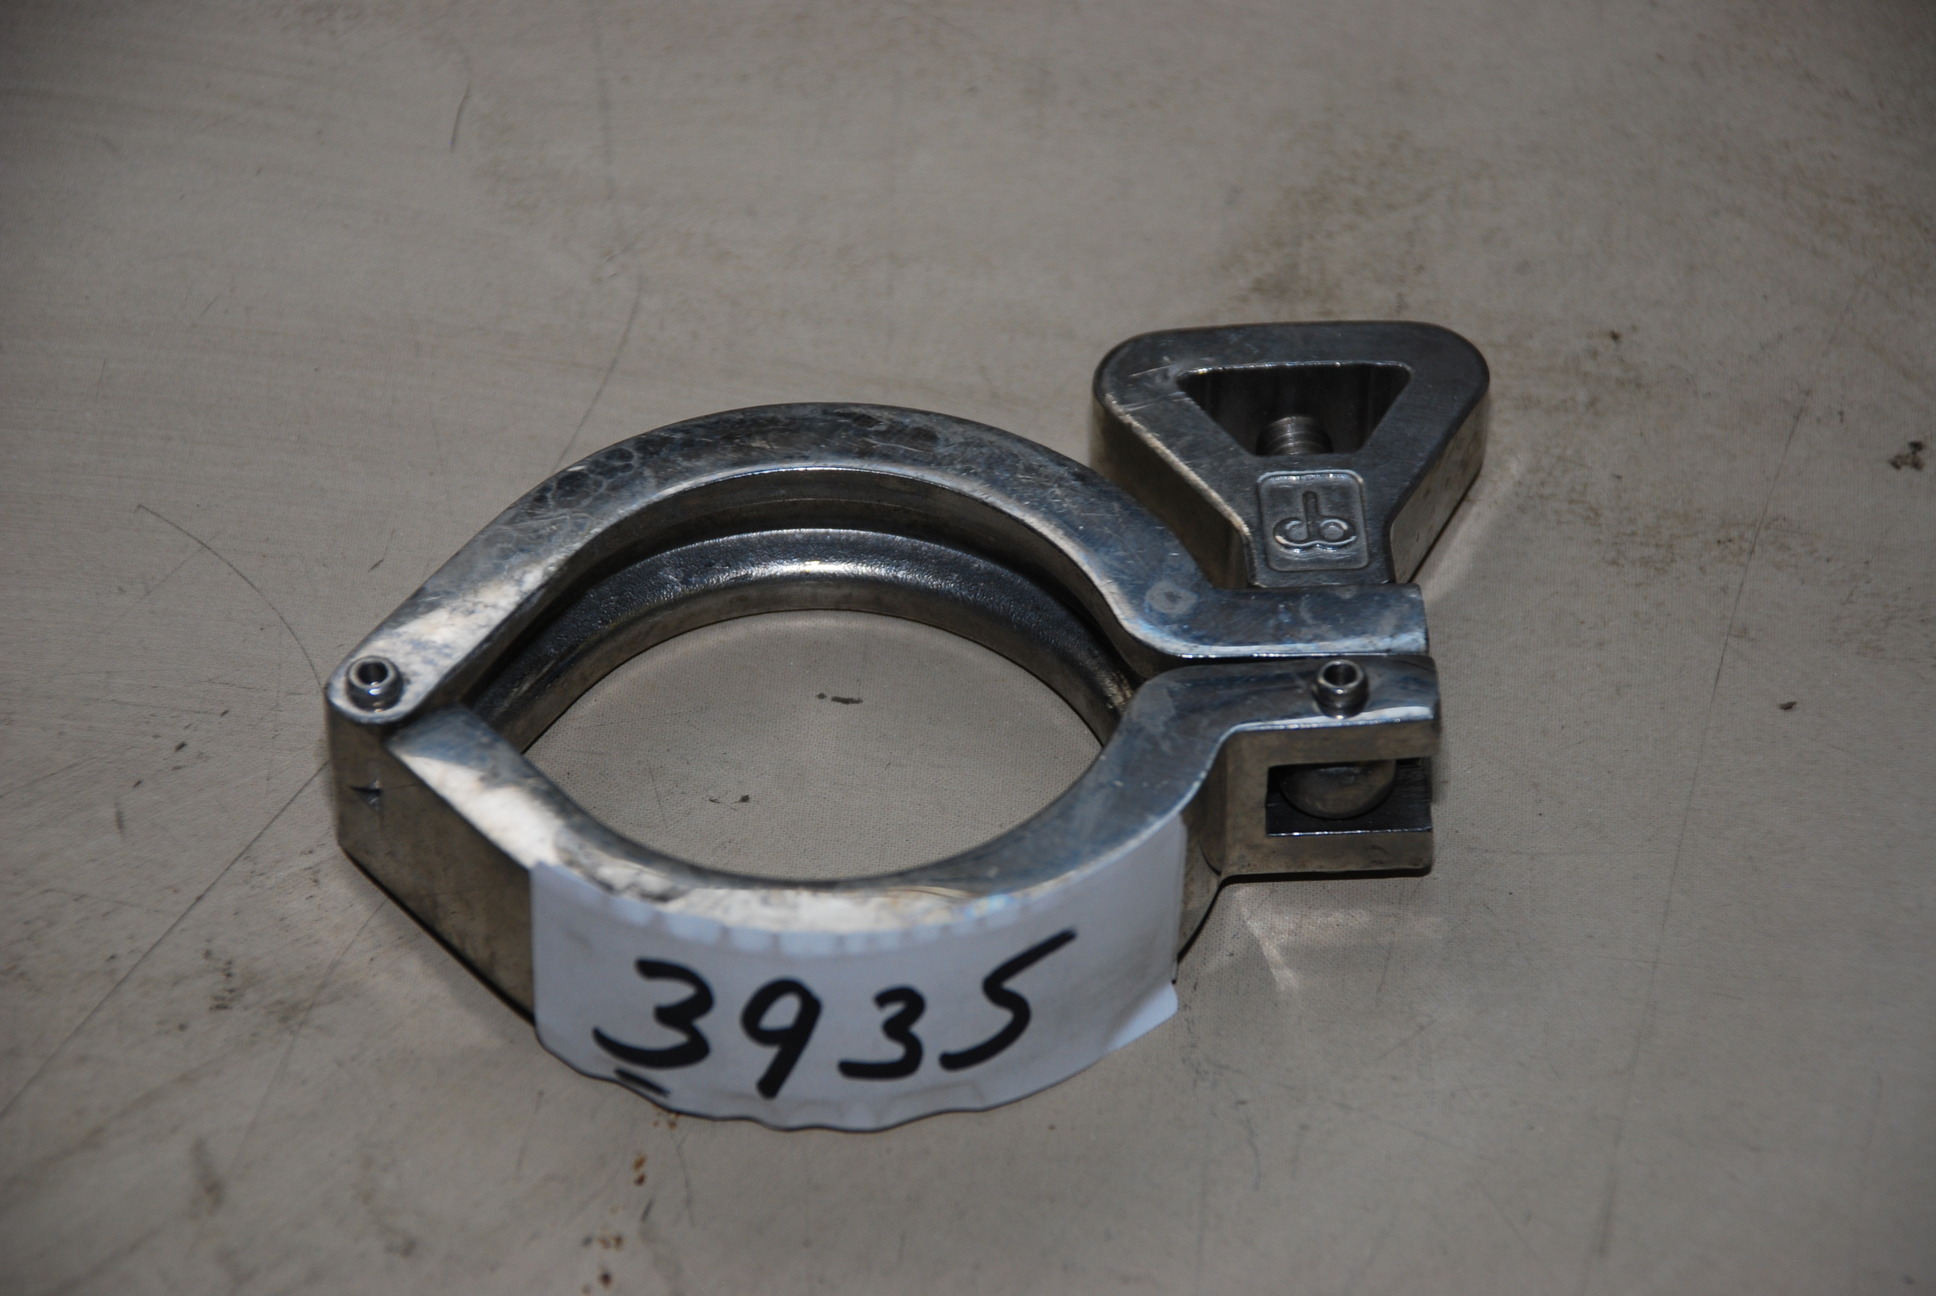 USED,2 1/2 Sanitary Stainless Steel Quick-Clamp Tube Fitting INV=3935 | eBay